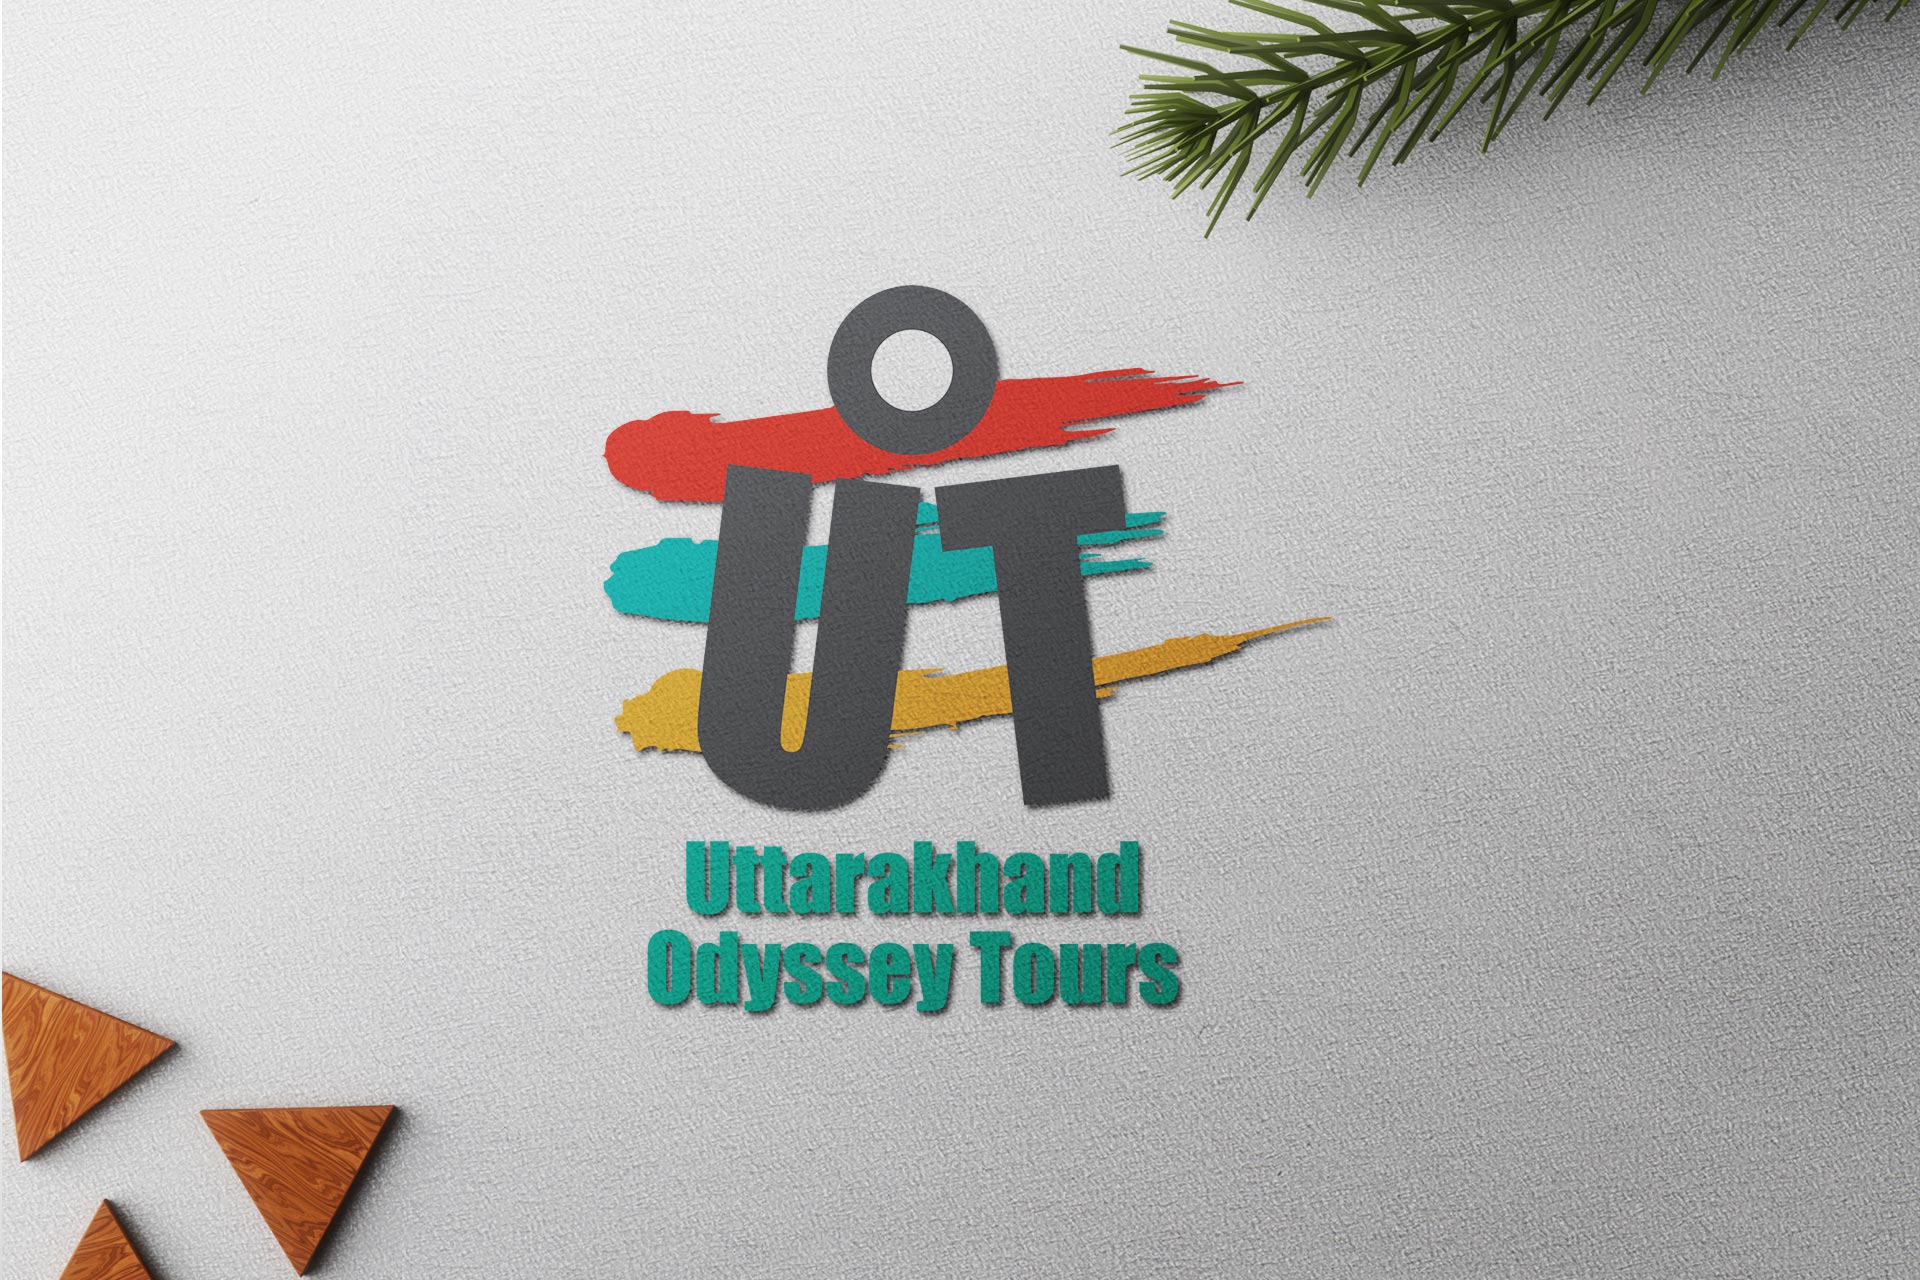 Uttarakhand Odyssey Tours is a travel and tour company based in Uttarakhand State. They primarily focus their tours in Nepal region. This logo is made with love by CodesGesture, Website Designing company in Gorakhpur.